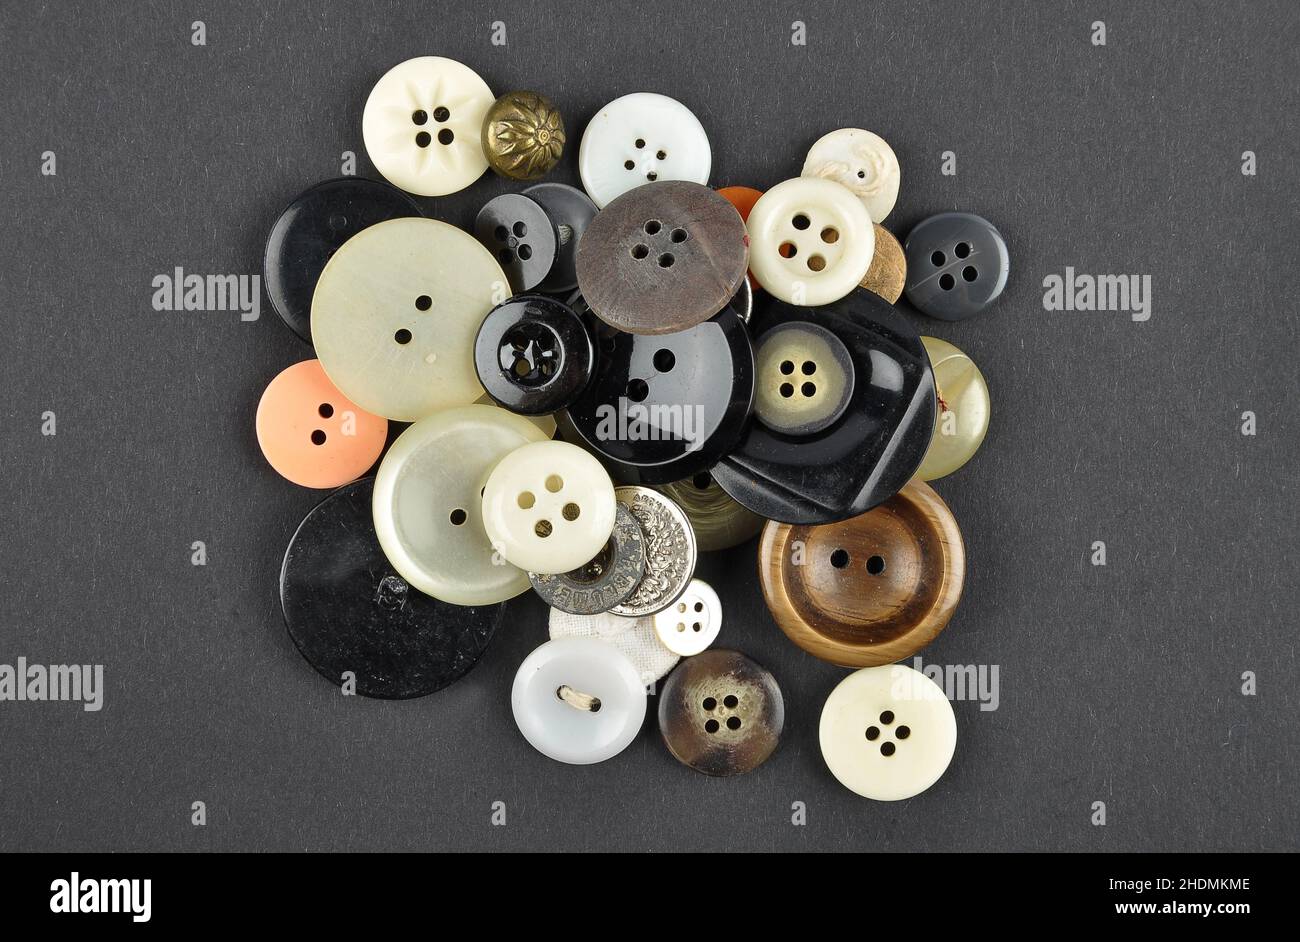 buttons, button Stock Photo